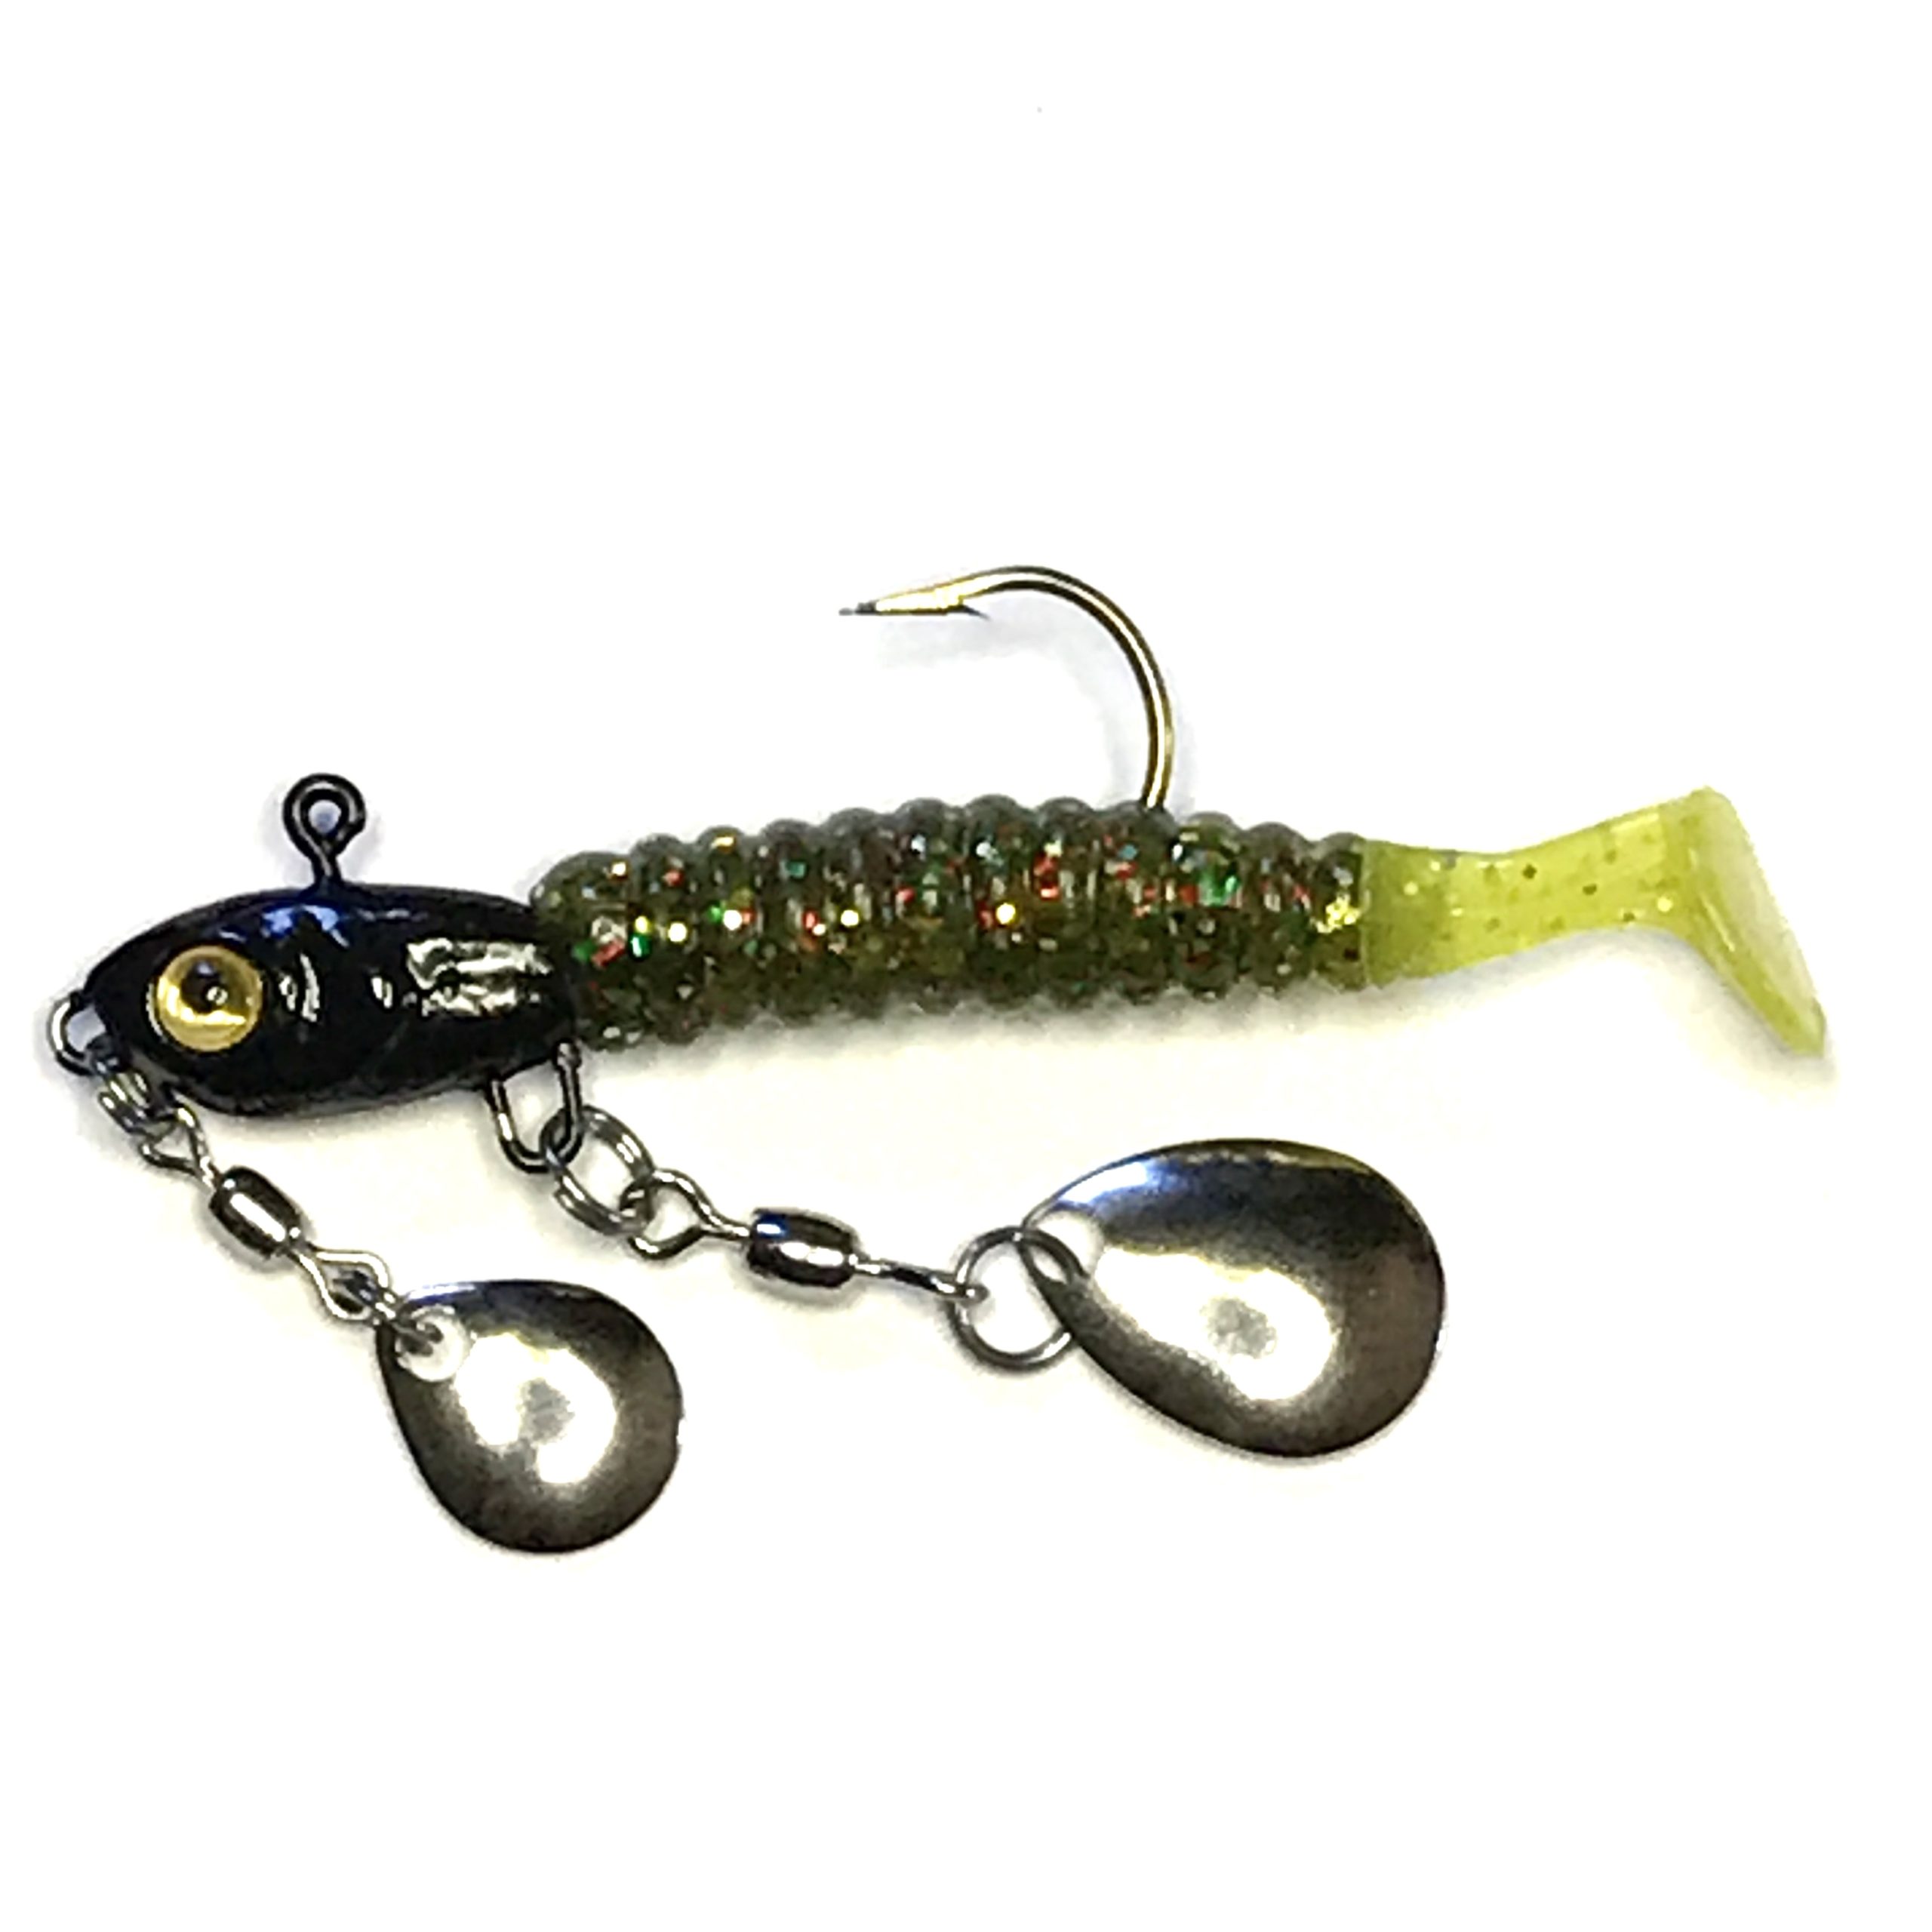 Crappie Dueller 4-Lure Kit: Green Machine – Glasswater Angling tm